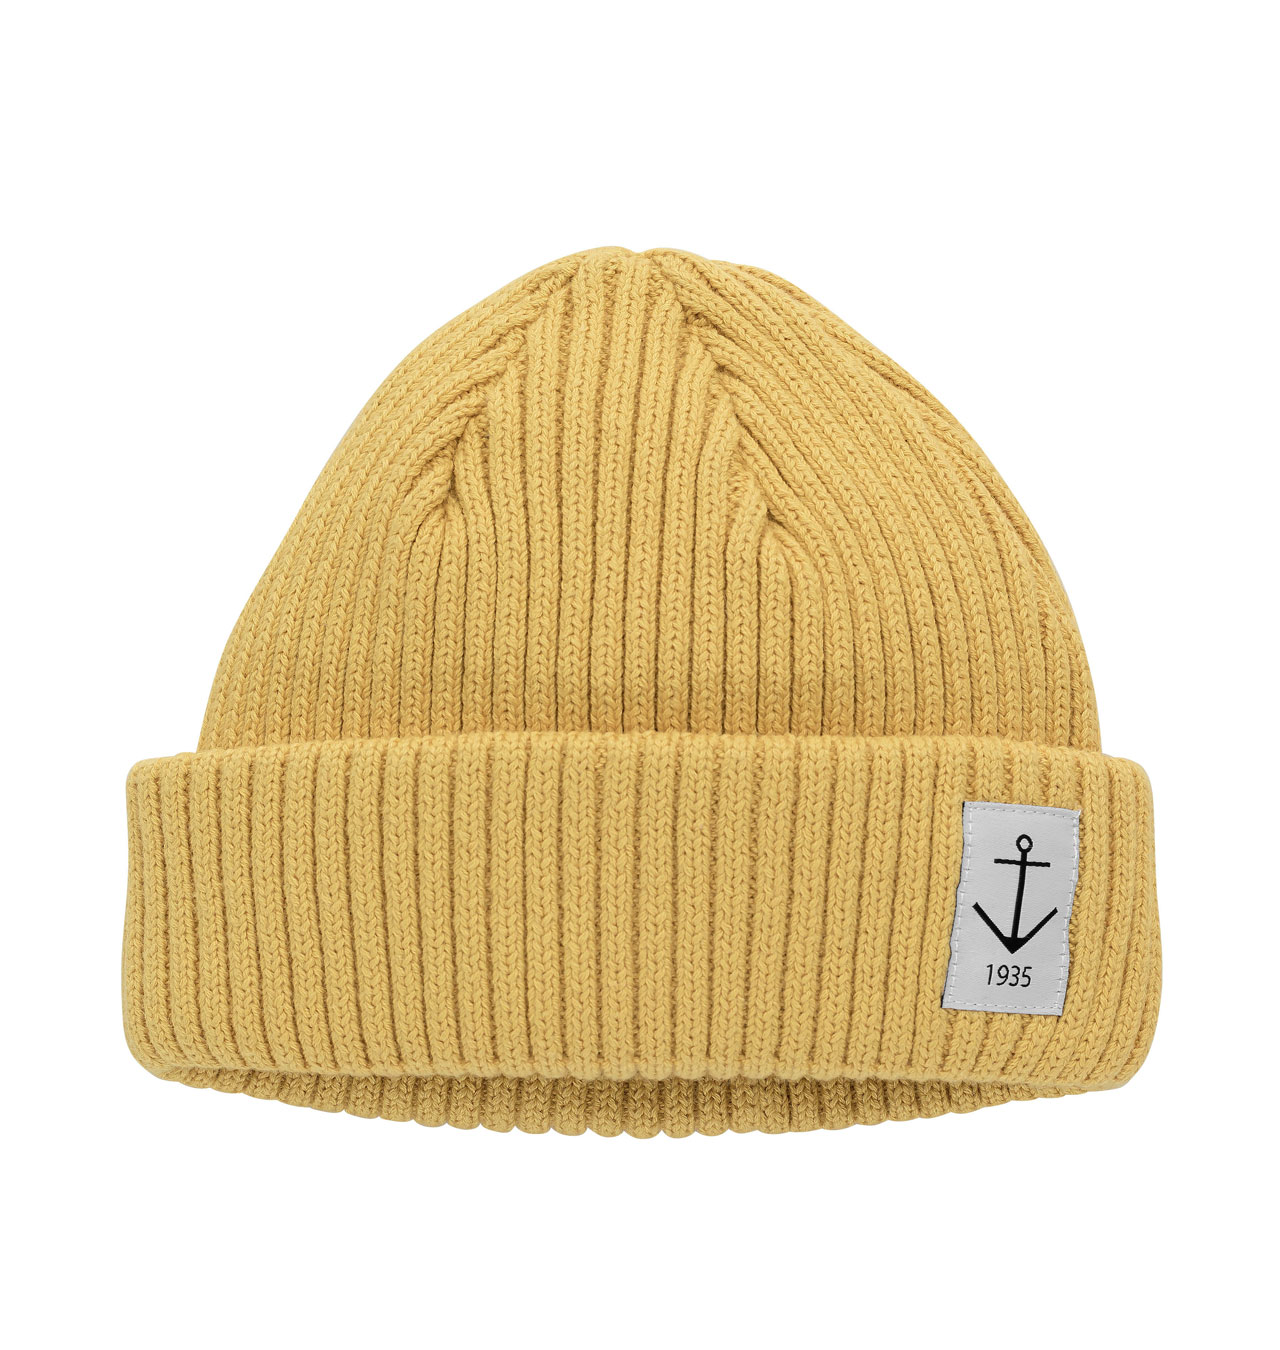 Resterods---Smula-Anchor-Beanie---Yellow-Ginger